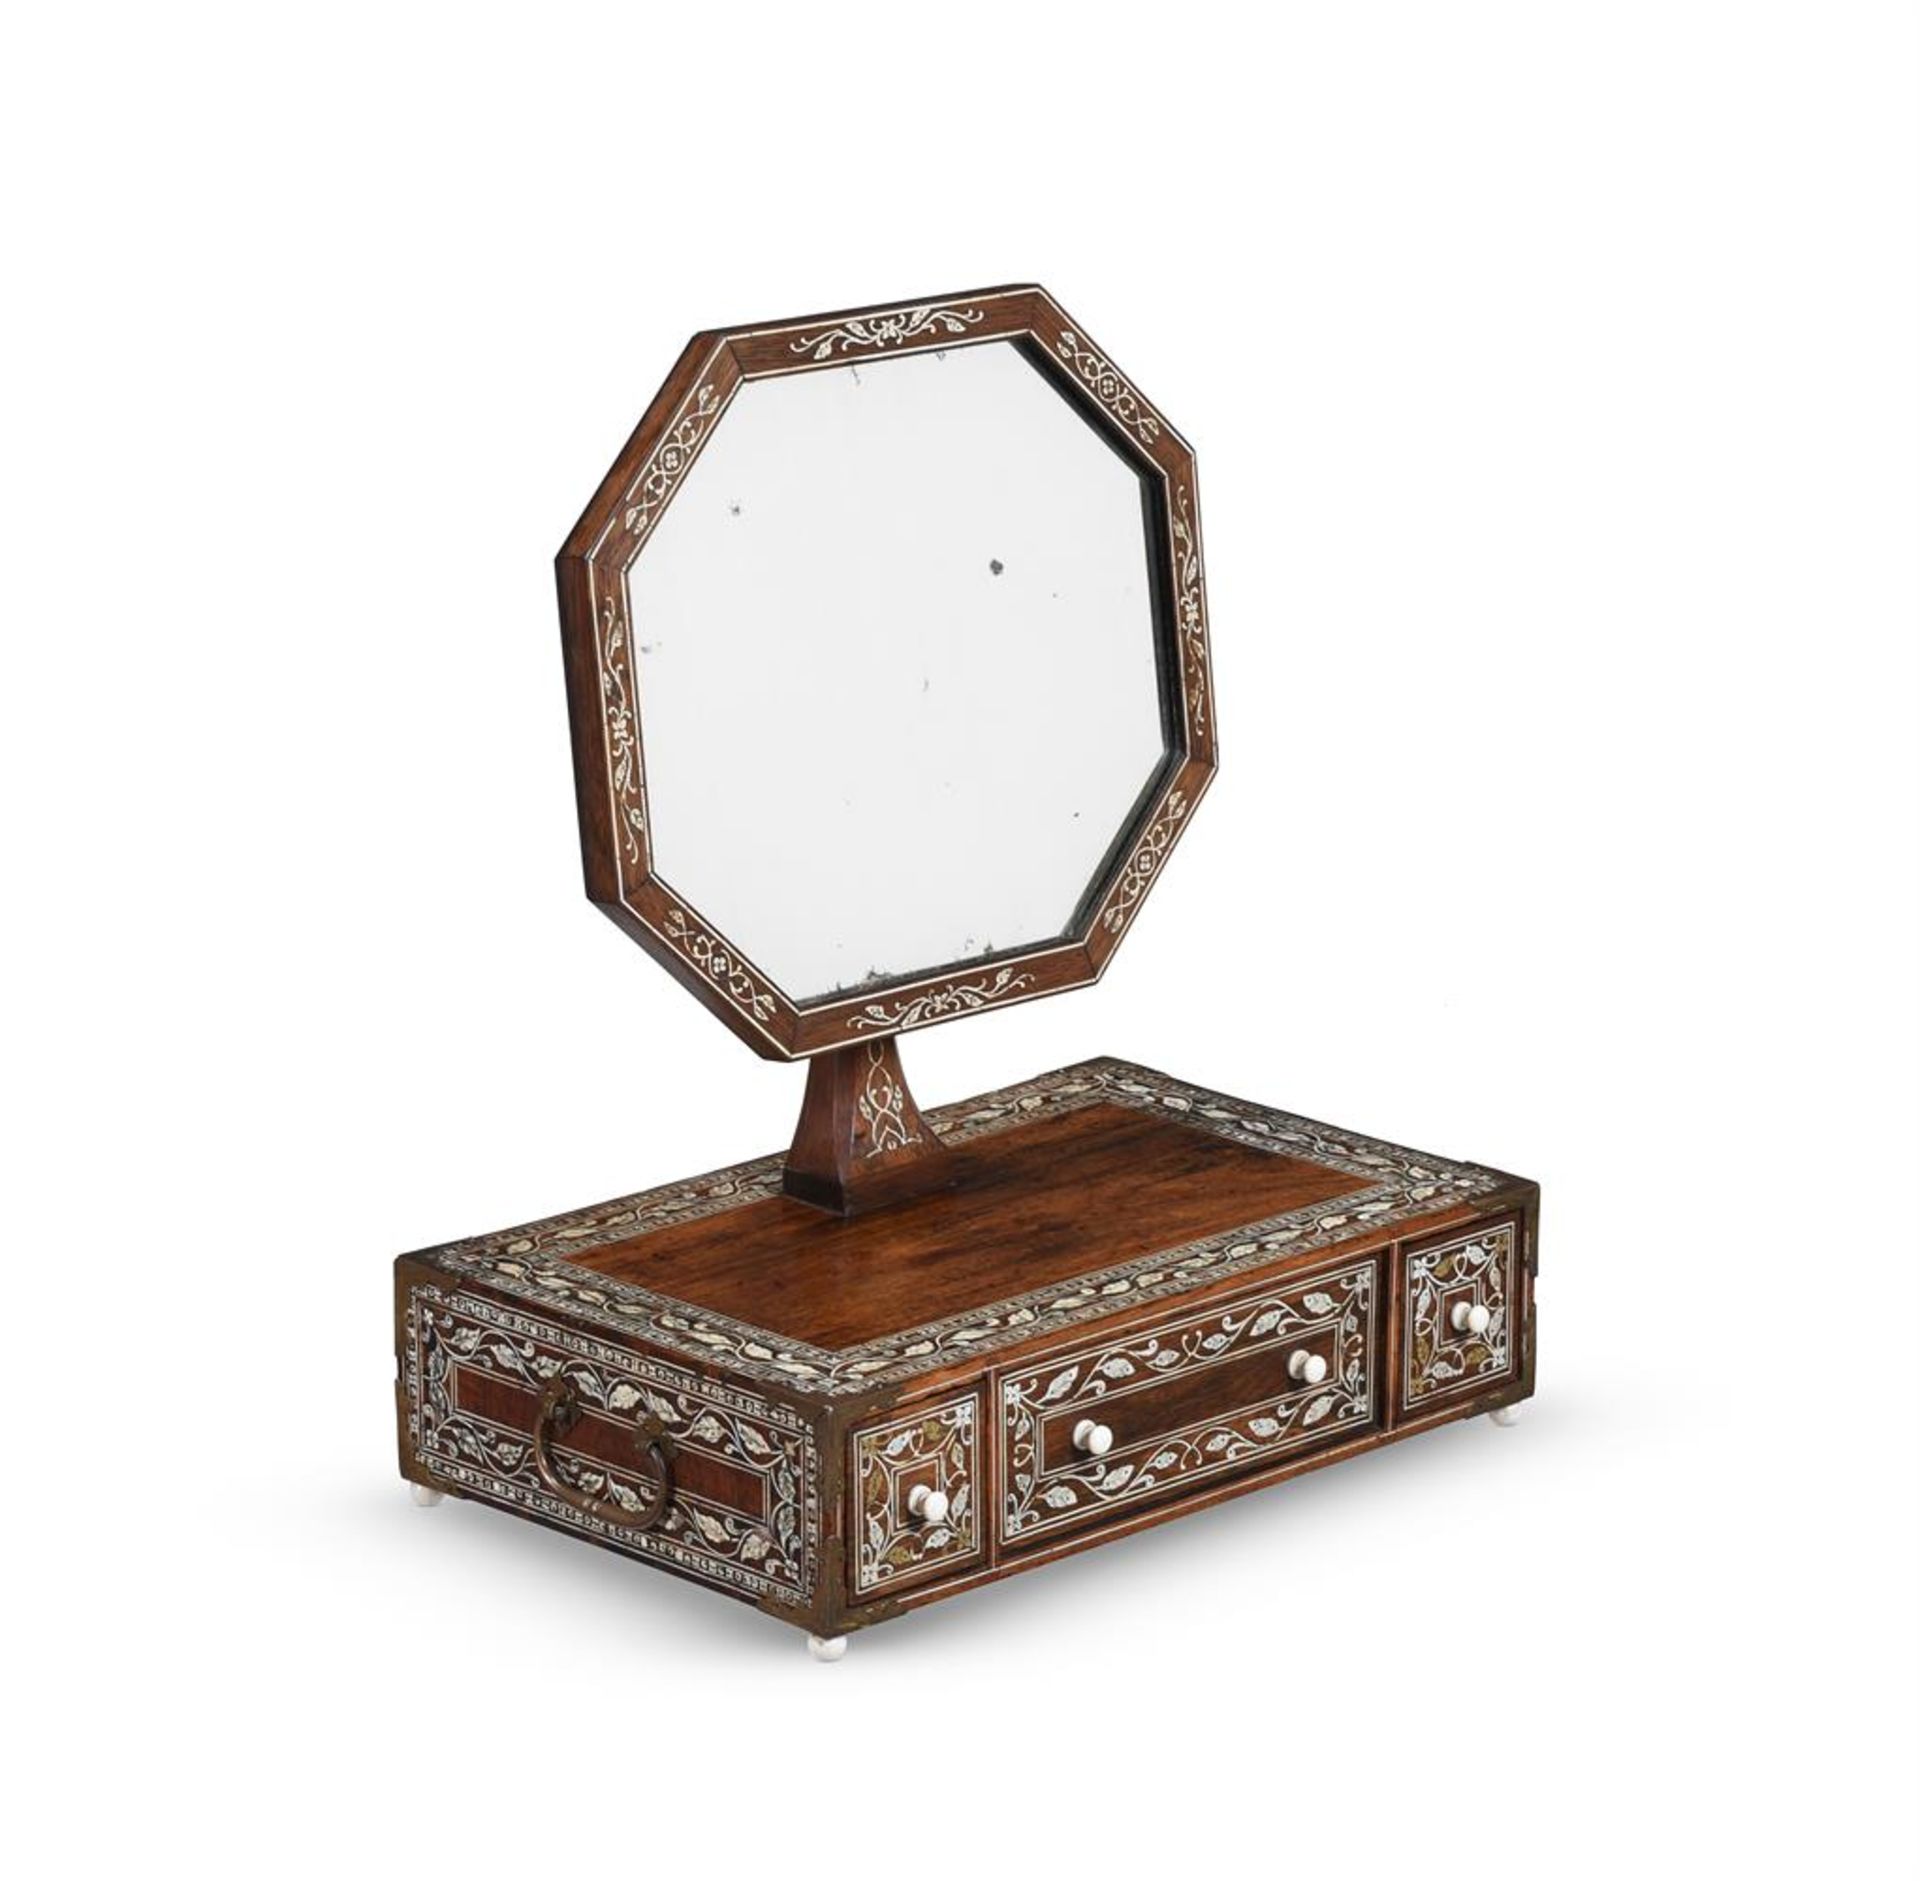 Y AN ANGLO-INDIAN ROSEWOOD, IVORY AND BONE DRESSING MIRROR, FIRST HALF 19TH CENTURY